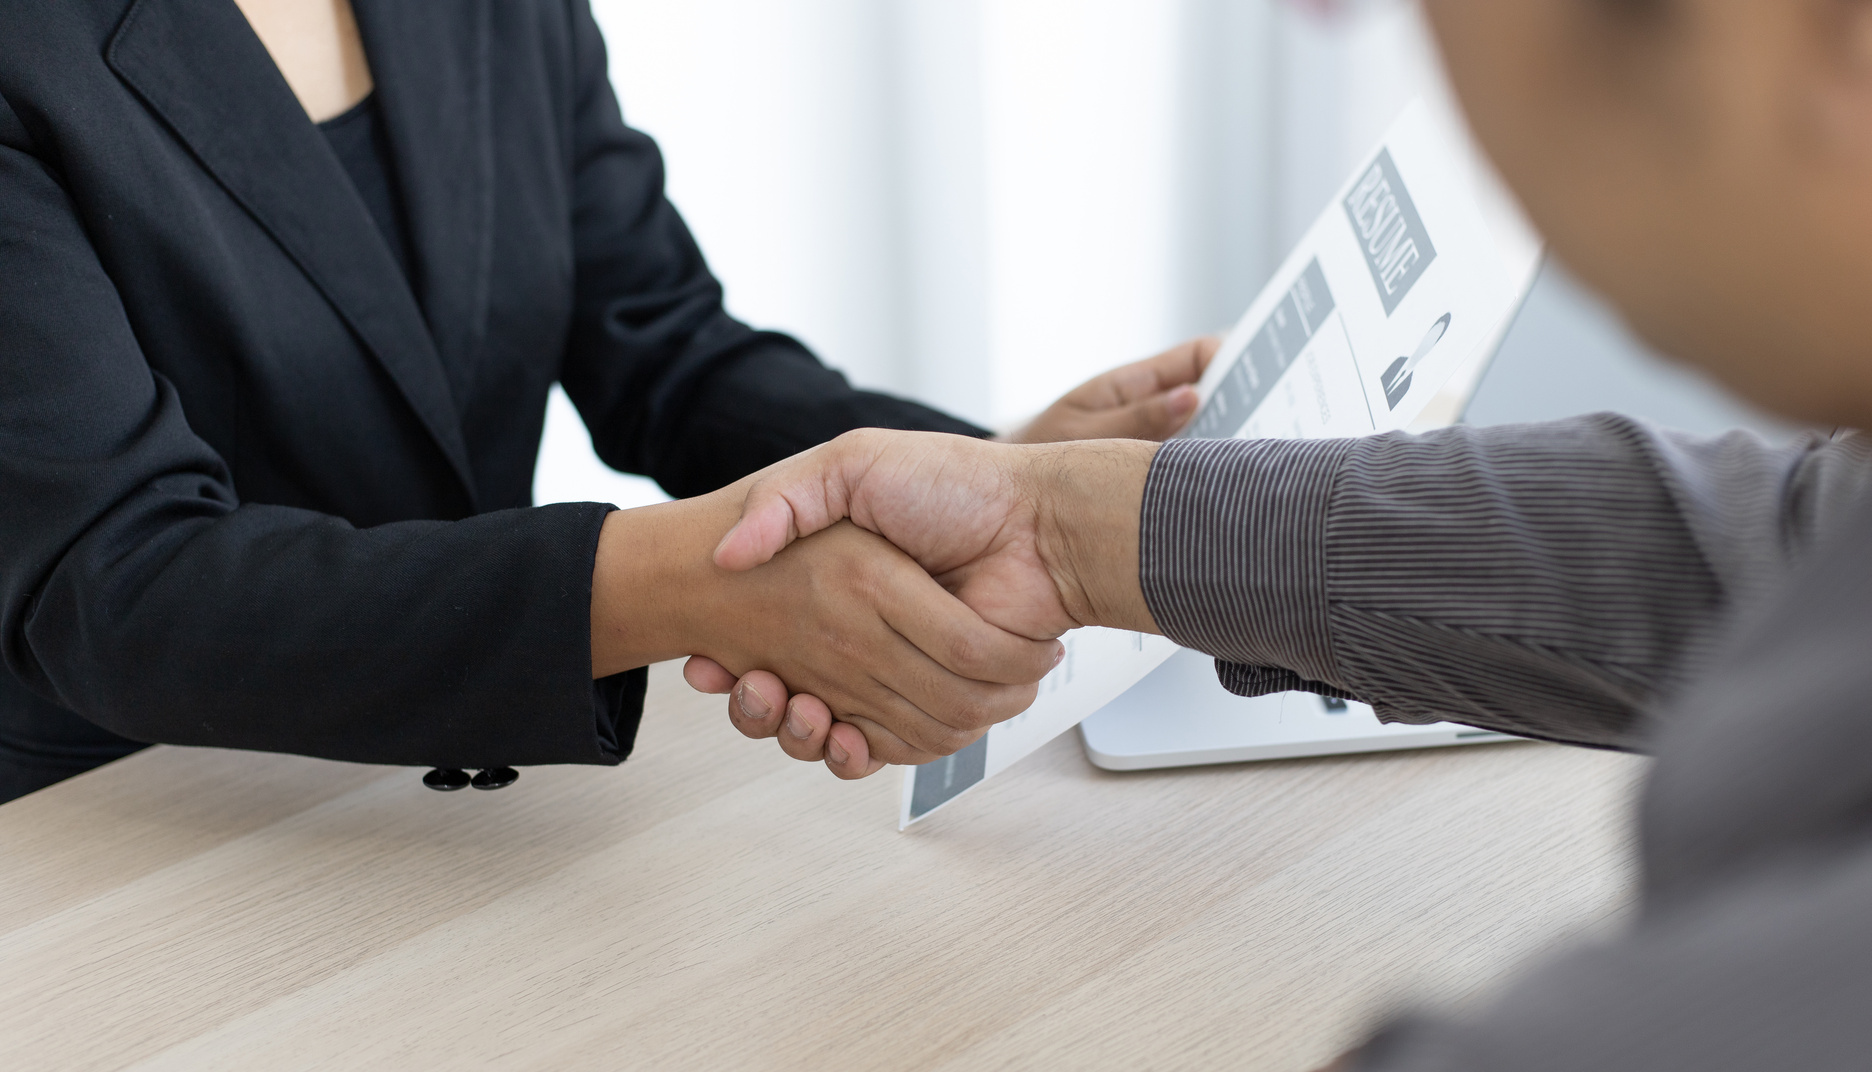 Handshake between Human Resources Manager and Applicant 